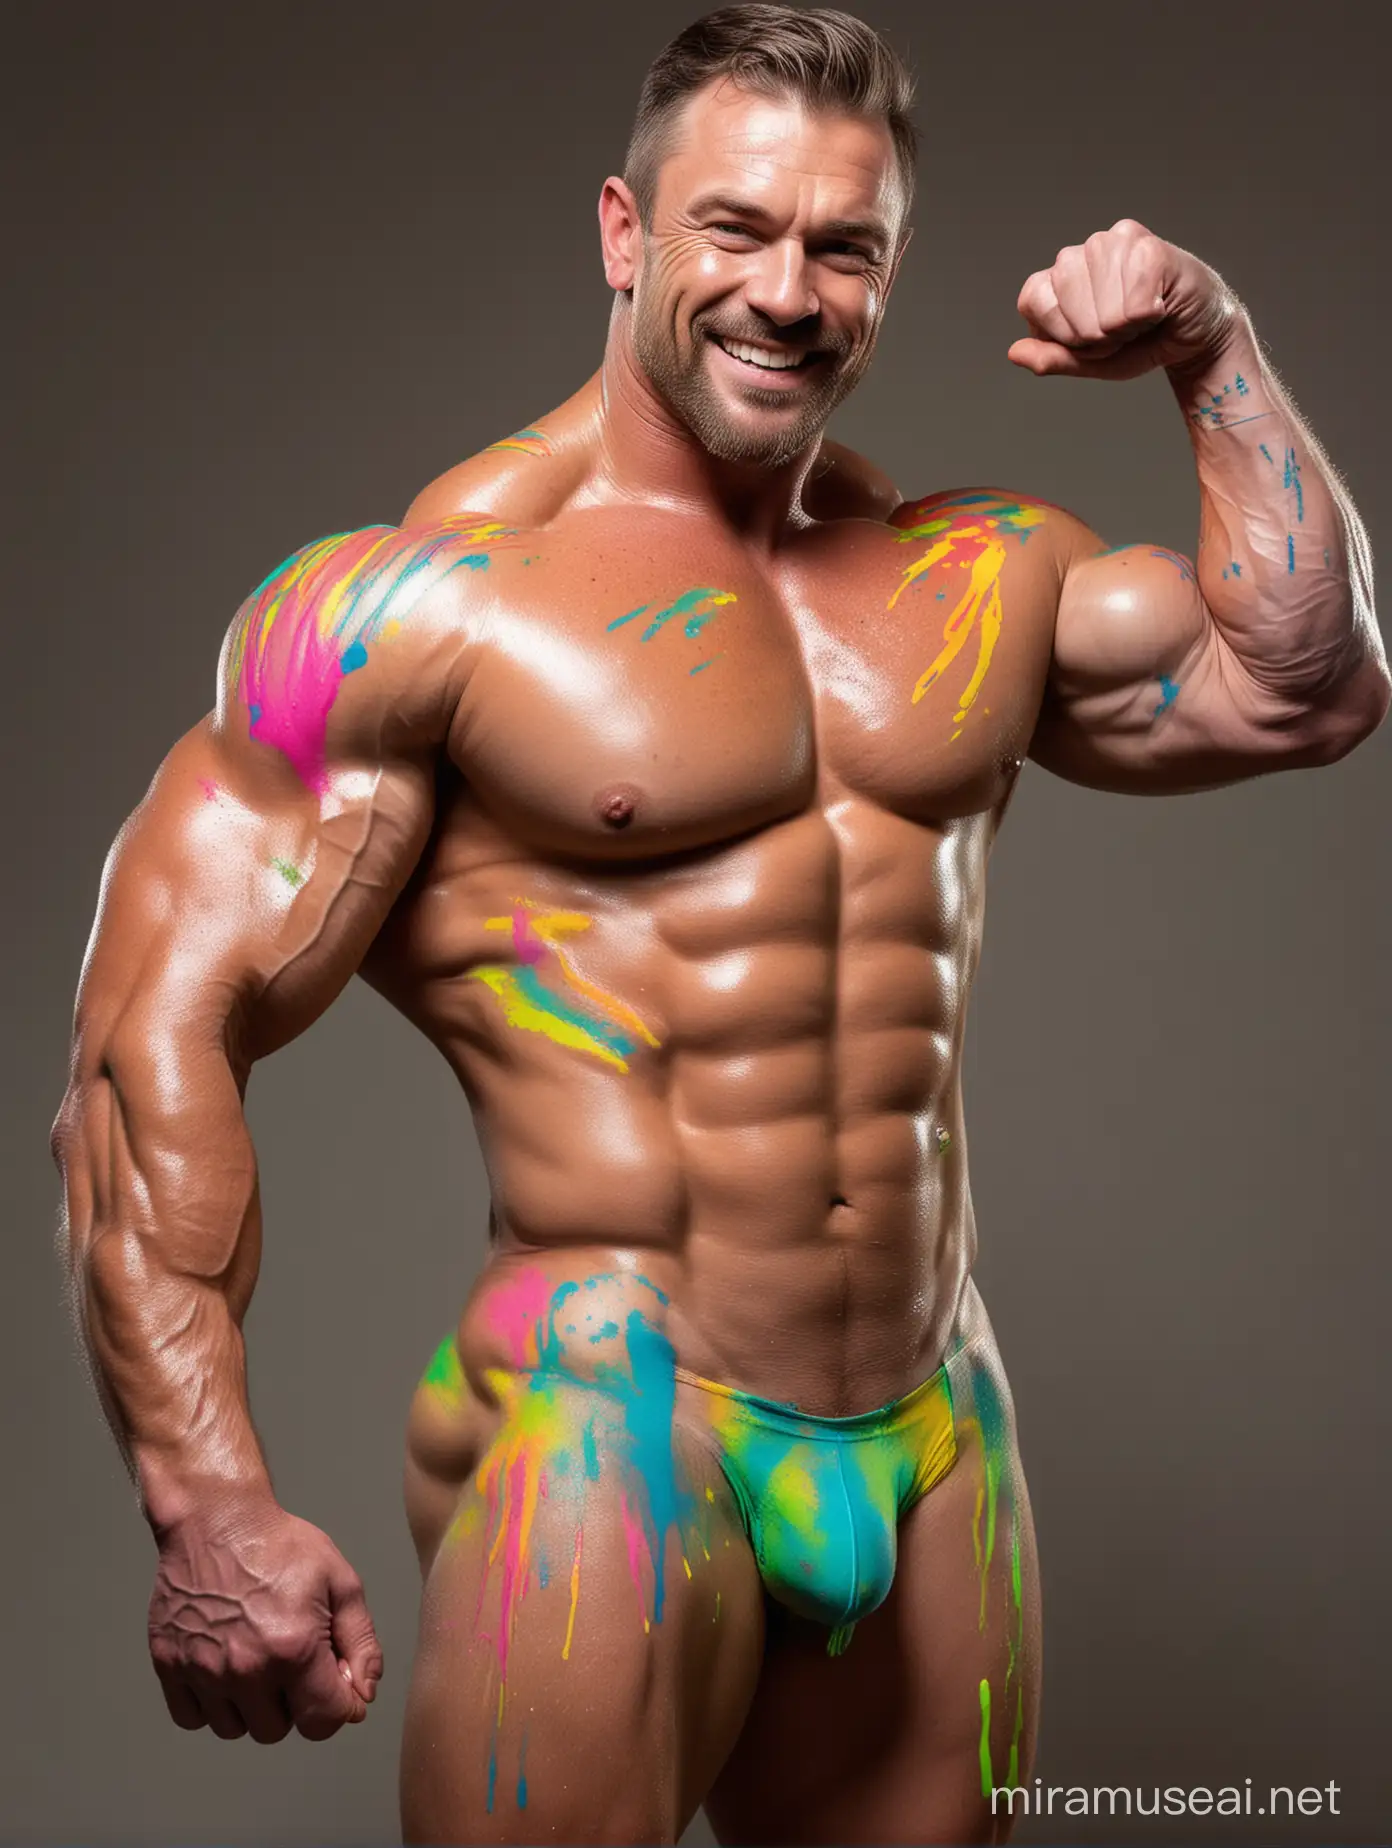 Topless 40s Ultra Beefy Happy Bodybuilder Daddy Glow in the Dark Highlighter Multi BRIGHT Coloured Ink Painted Poured all his body and Flexing his Big Strong Arm